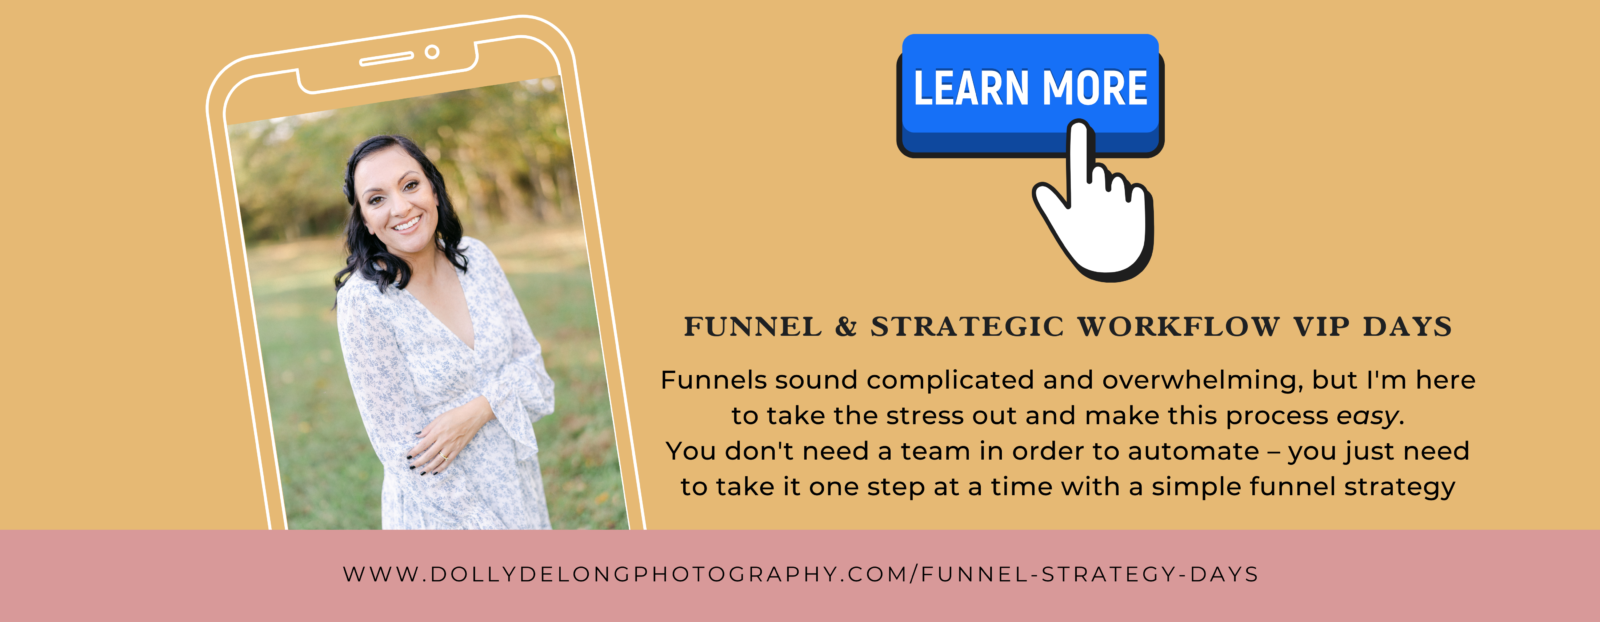 Funnel and Strategic Workflow VIP days